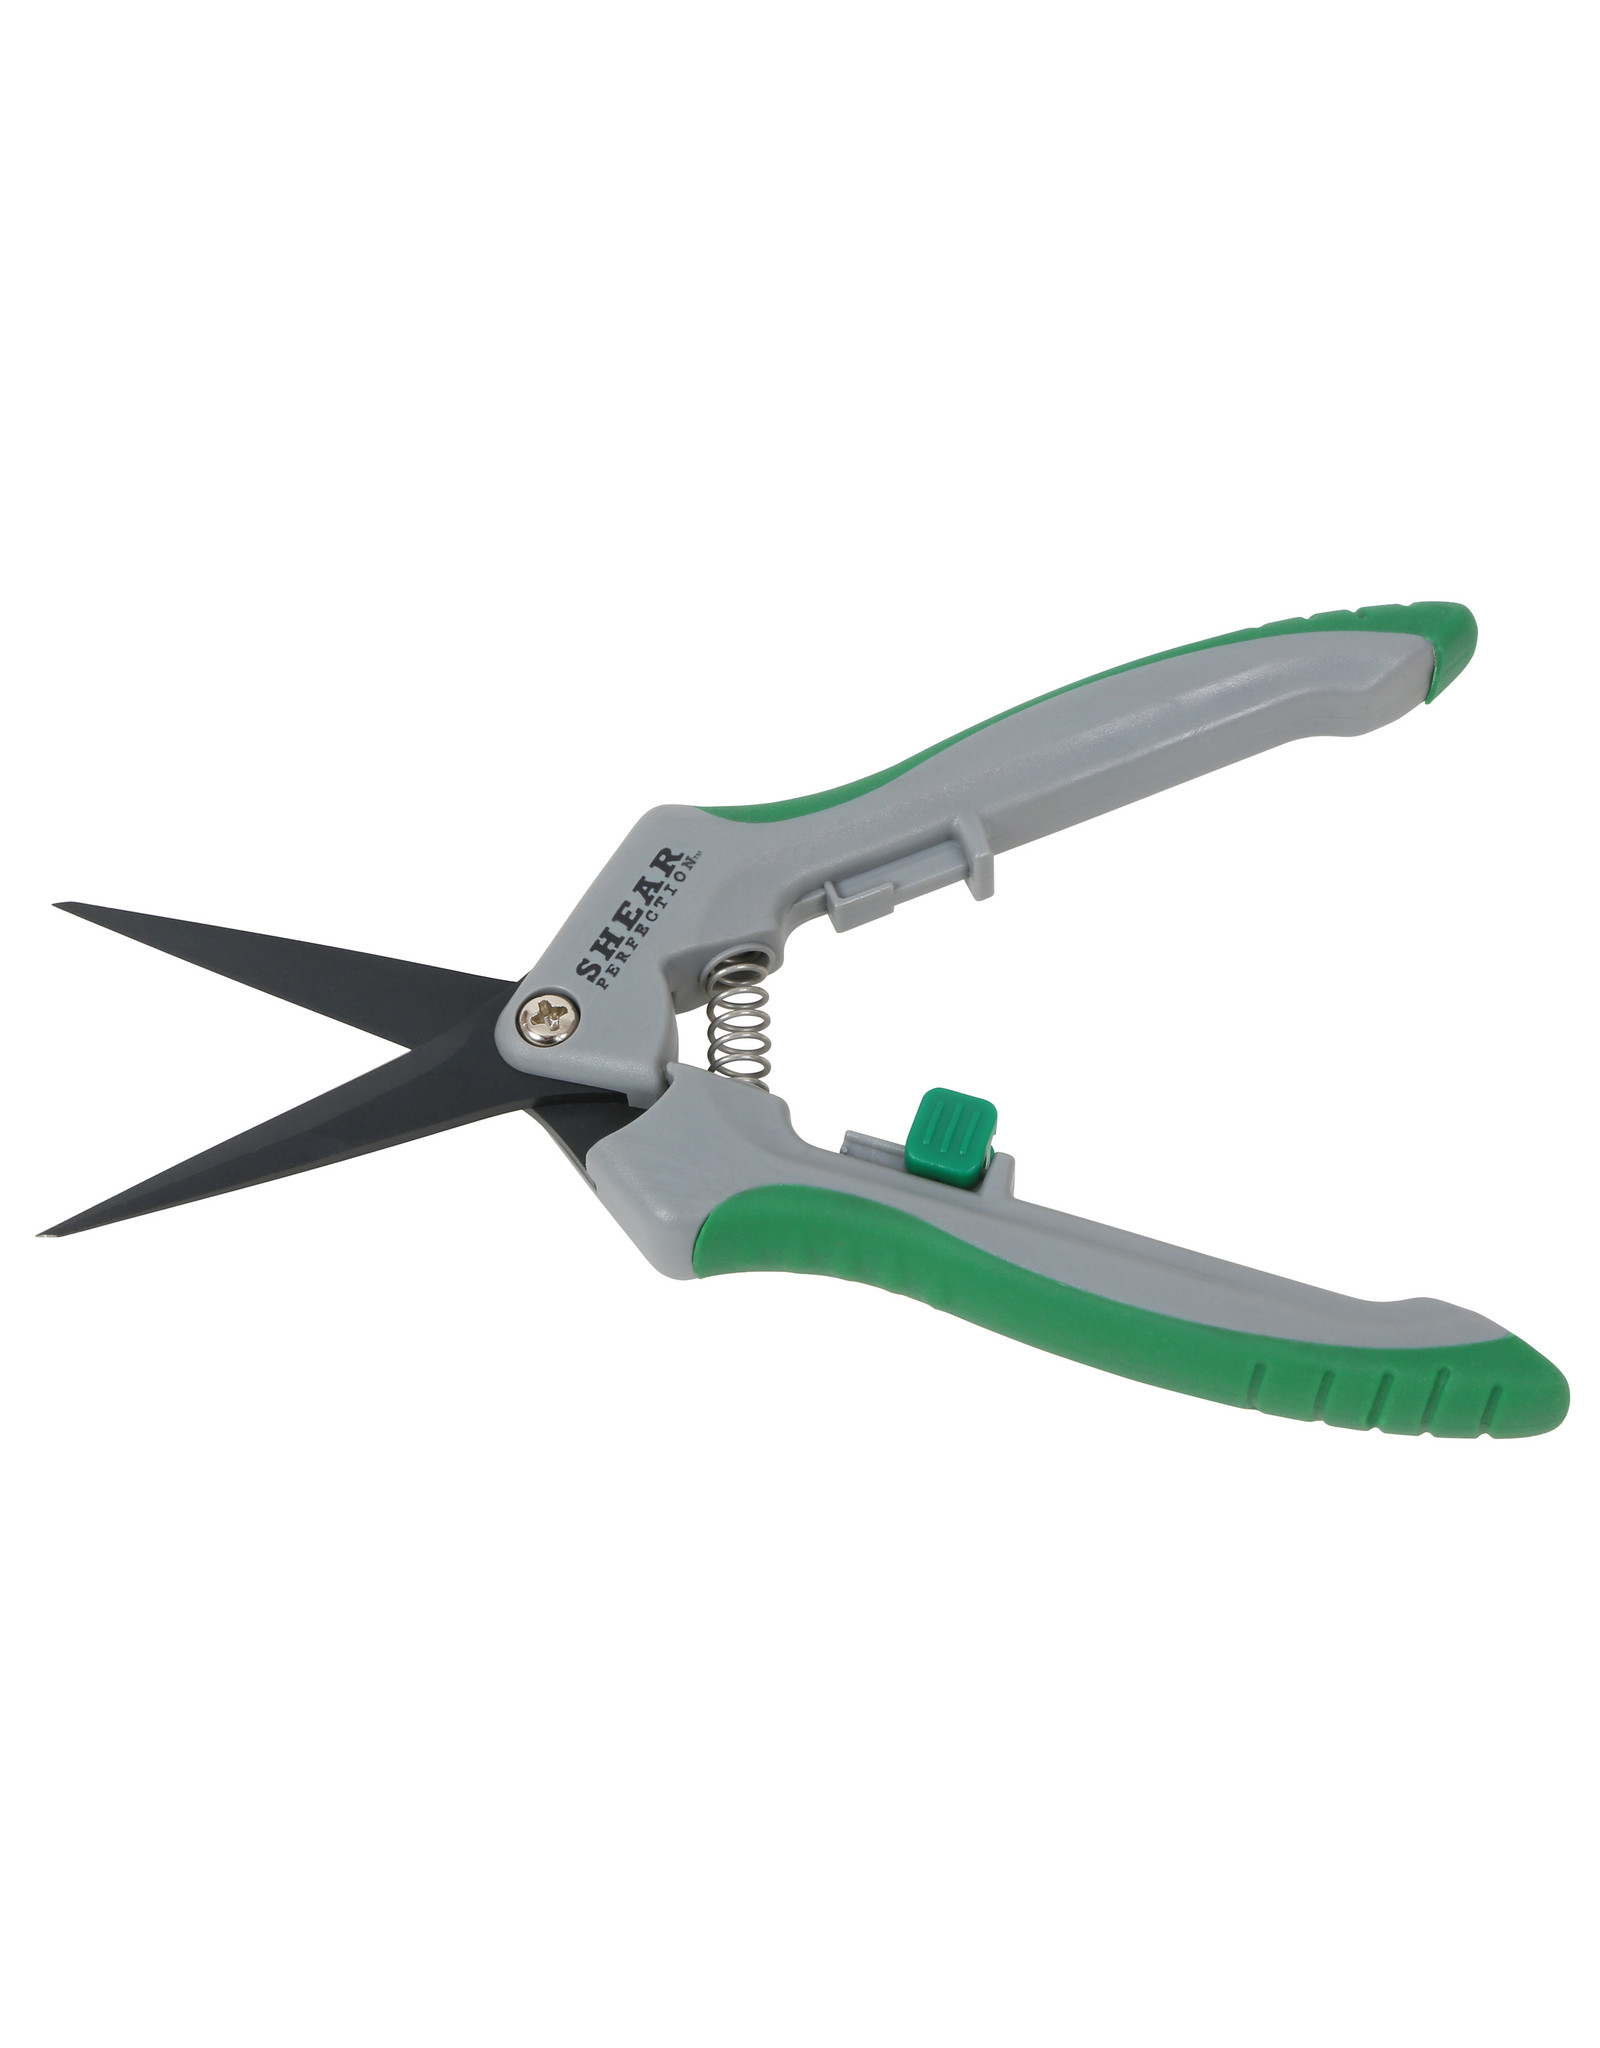 Shear Perfection Shear Perfection Platinum Trimming Shear - 2 in Straight Non-Stick Blades